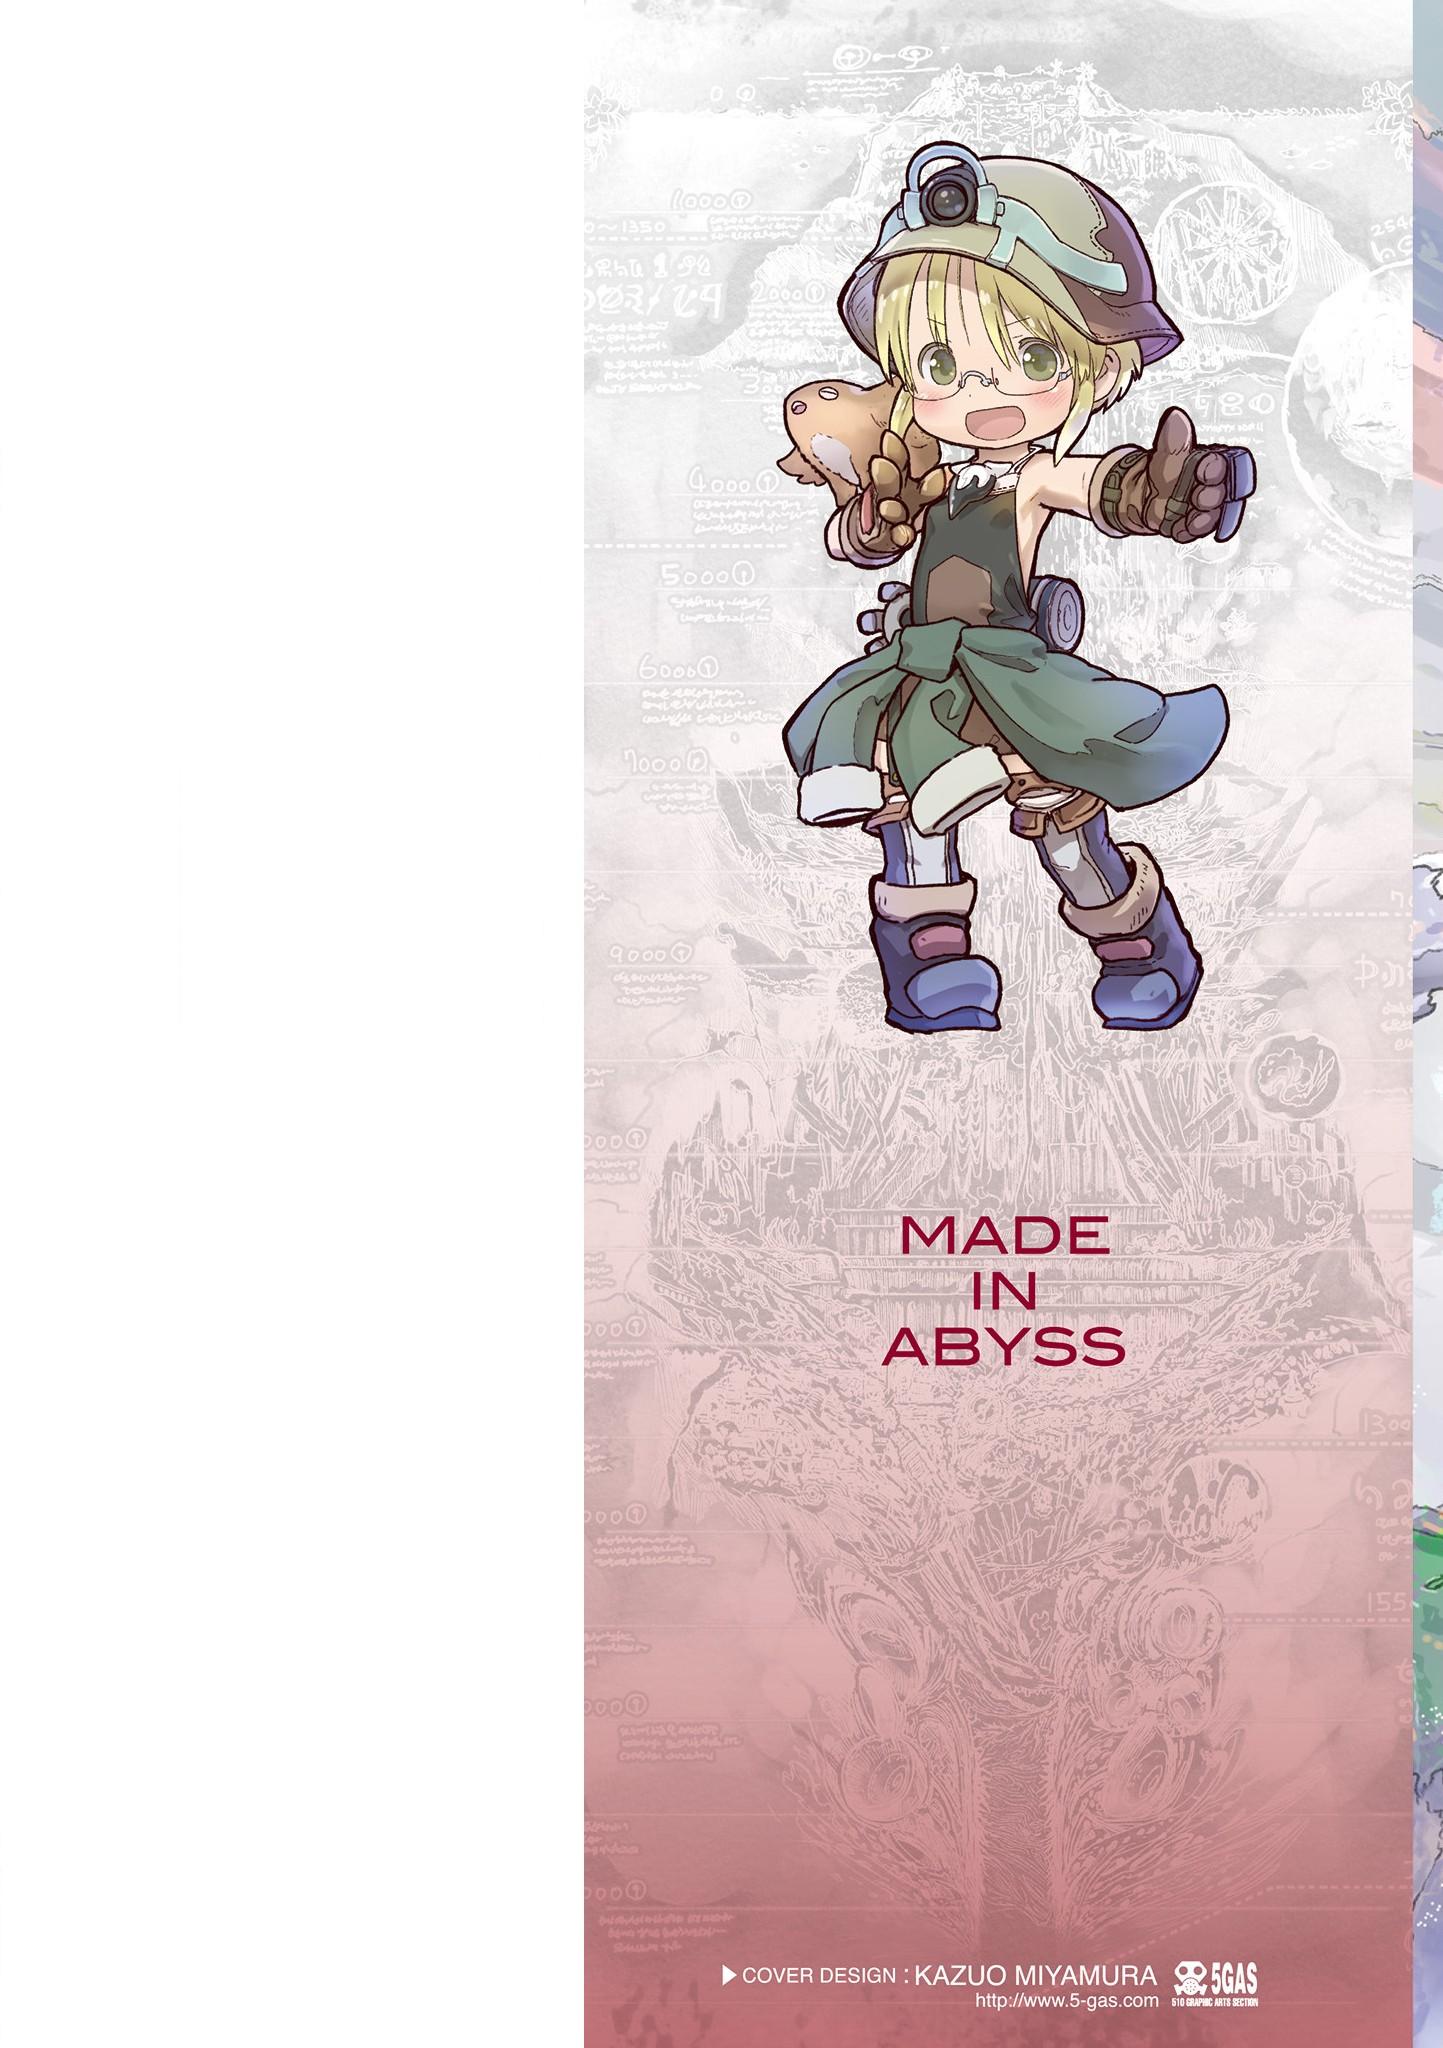 Read Made In Abyss Vol11 Chapter 635 Volume 11 Extras English Scans